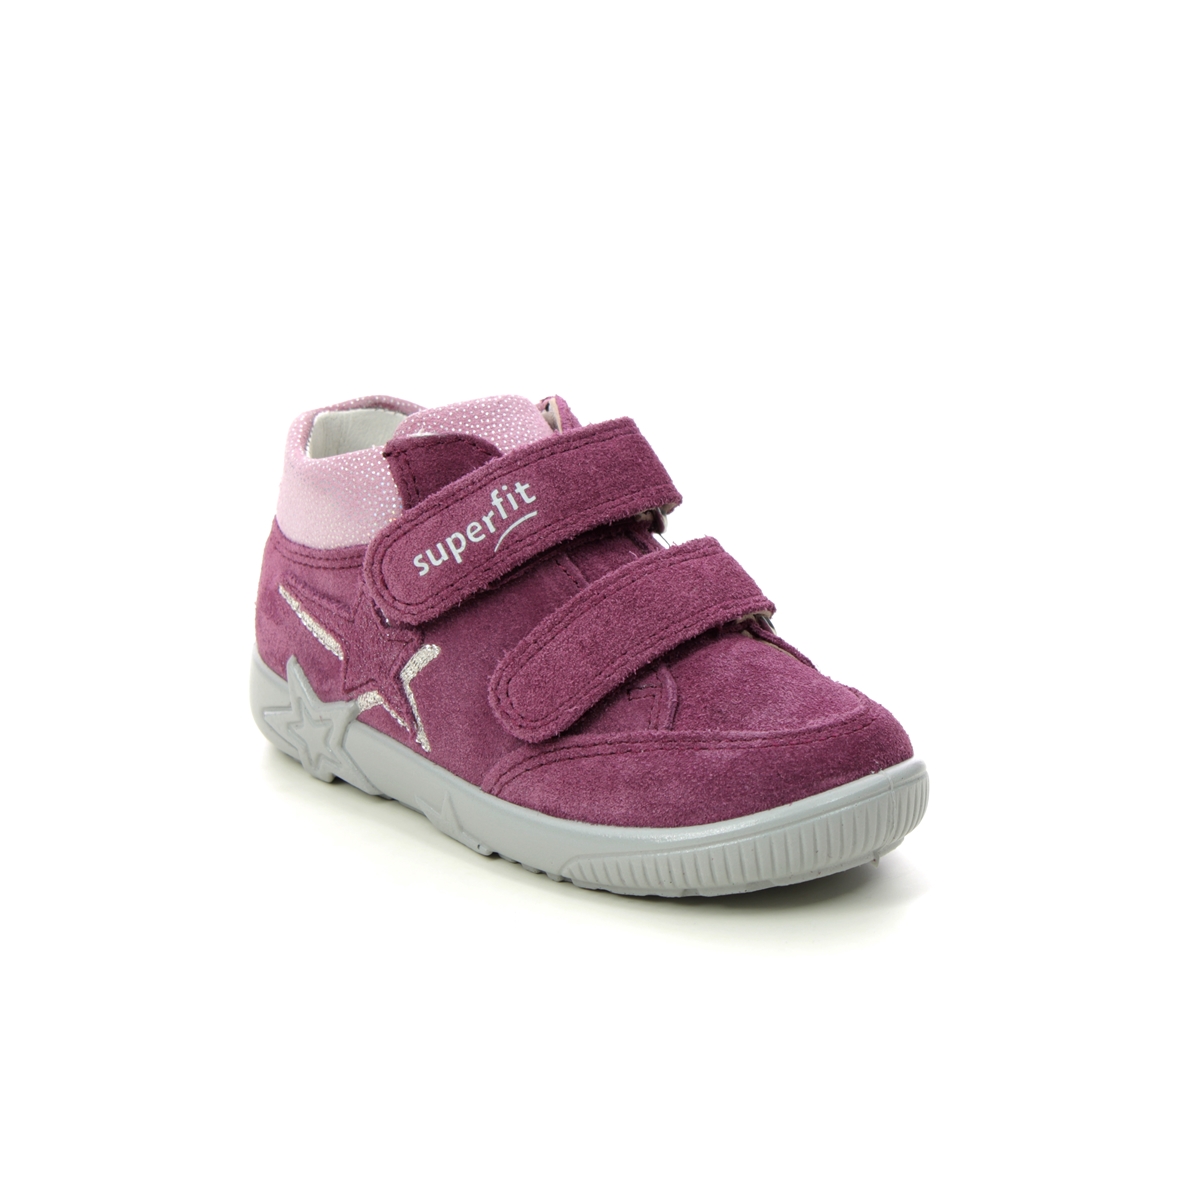 Superfit Starlight Ht 2V Pink Suede Kids First Shoes 1006443-5510 In Size 21 In Plain Pink Suede